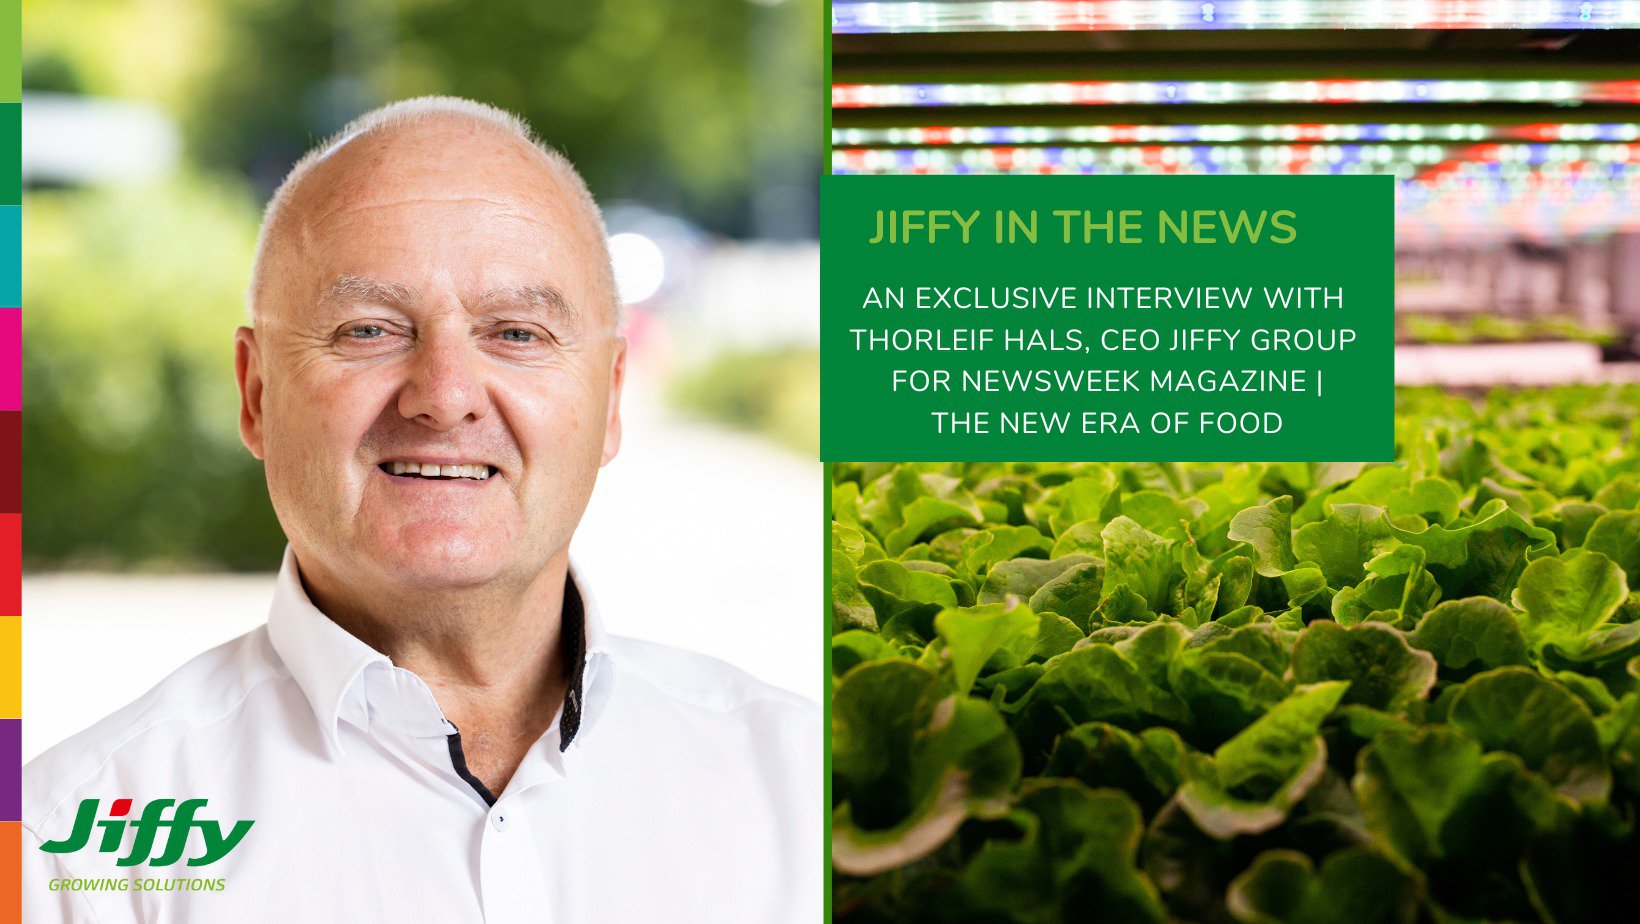 An image showcasing Thorleif Hals, CEO of Jiffy Group, with a smile, standing beside an indoor agriculture production of lettuce. A white message overlay reads, "An Exclusive Interview with Thorleif Hals, CEO of Jiffy Group, for Newsweek Magazine."